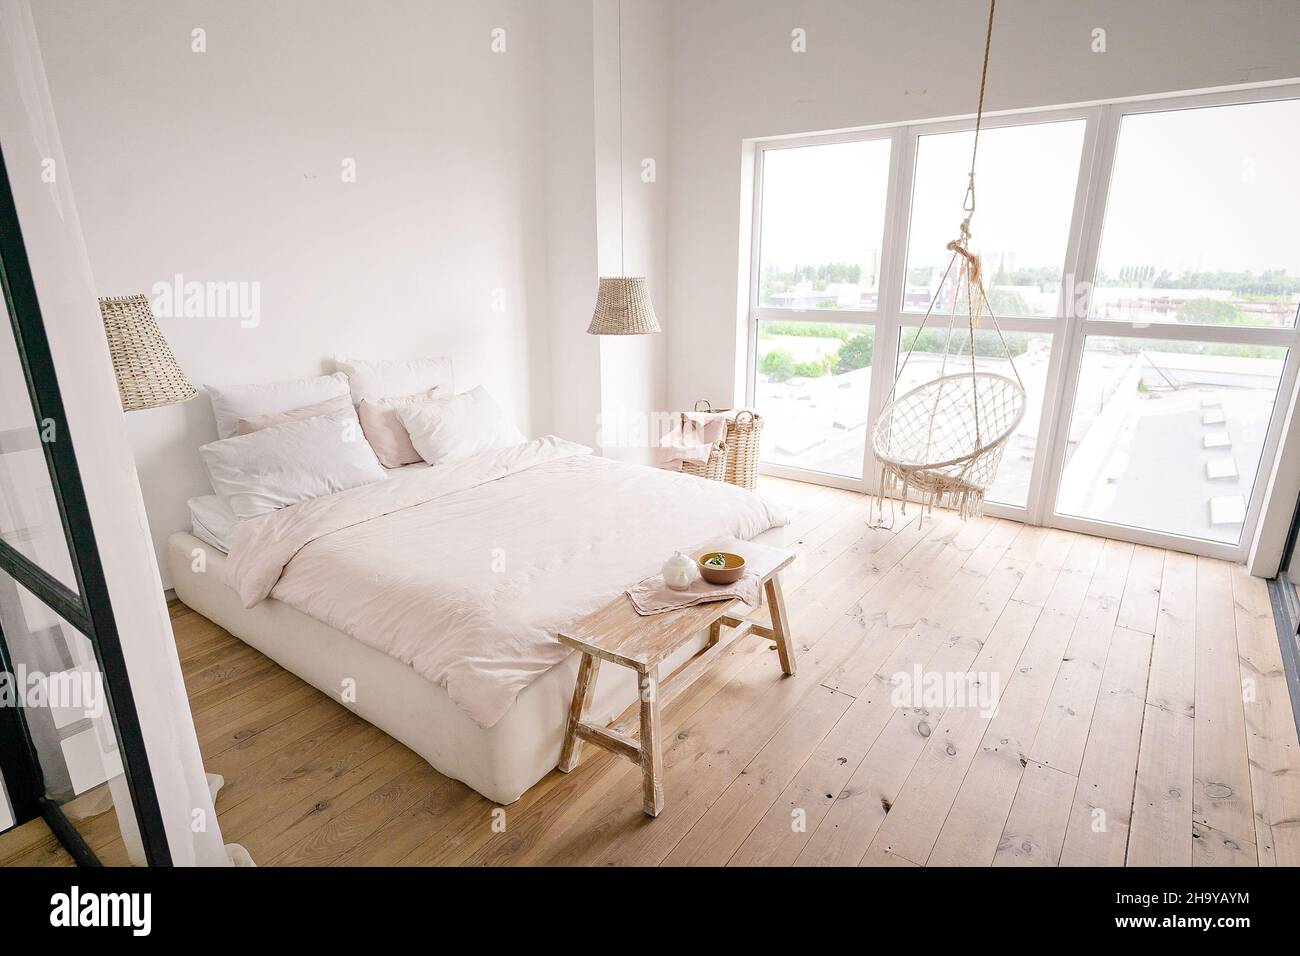 Large Bright Bedroom in a Minimalist Style in Pastel Cream Colors with a Double Bed, White Walls, a Wicker Laundry Basket, Wicker Chandeliers, Beige Bed Bench, Large Window , Boho Hanging Chair and Wooden Floor. . High quality photo Stock Photo